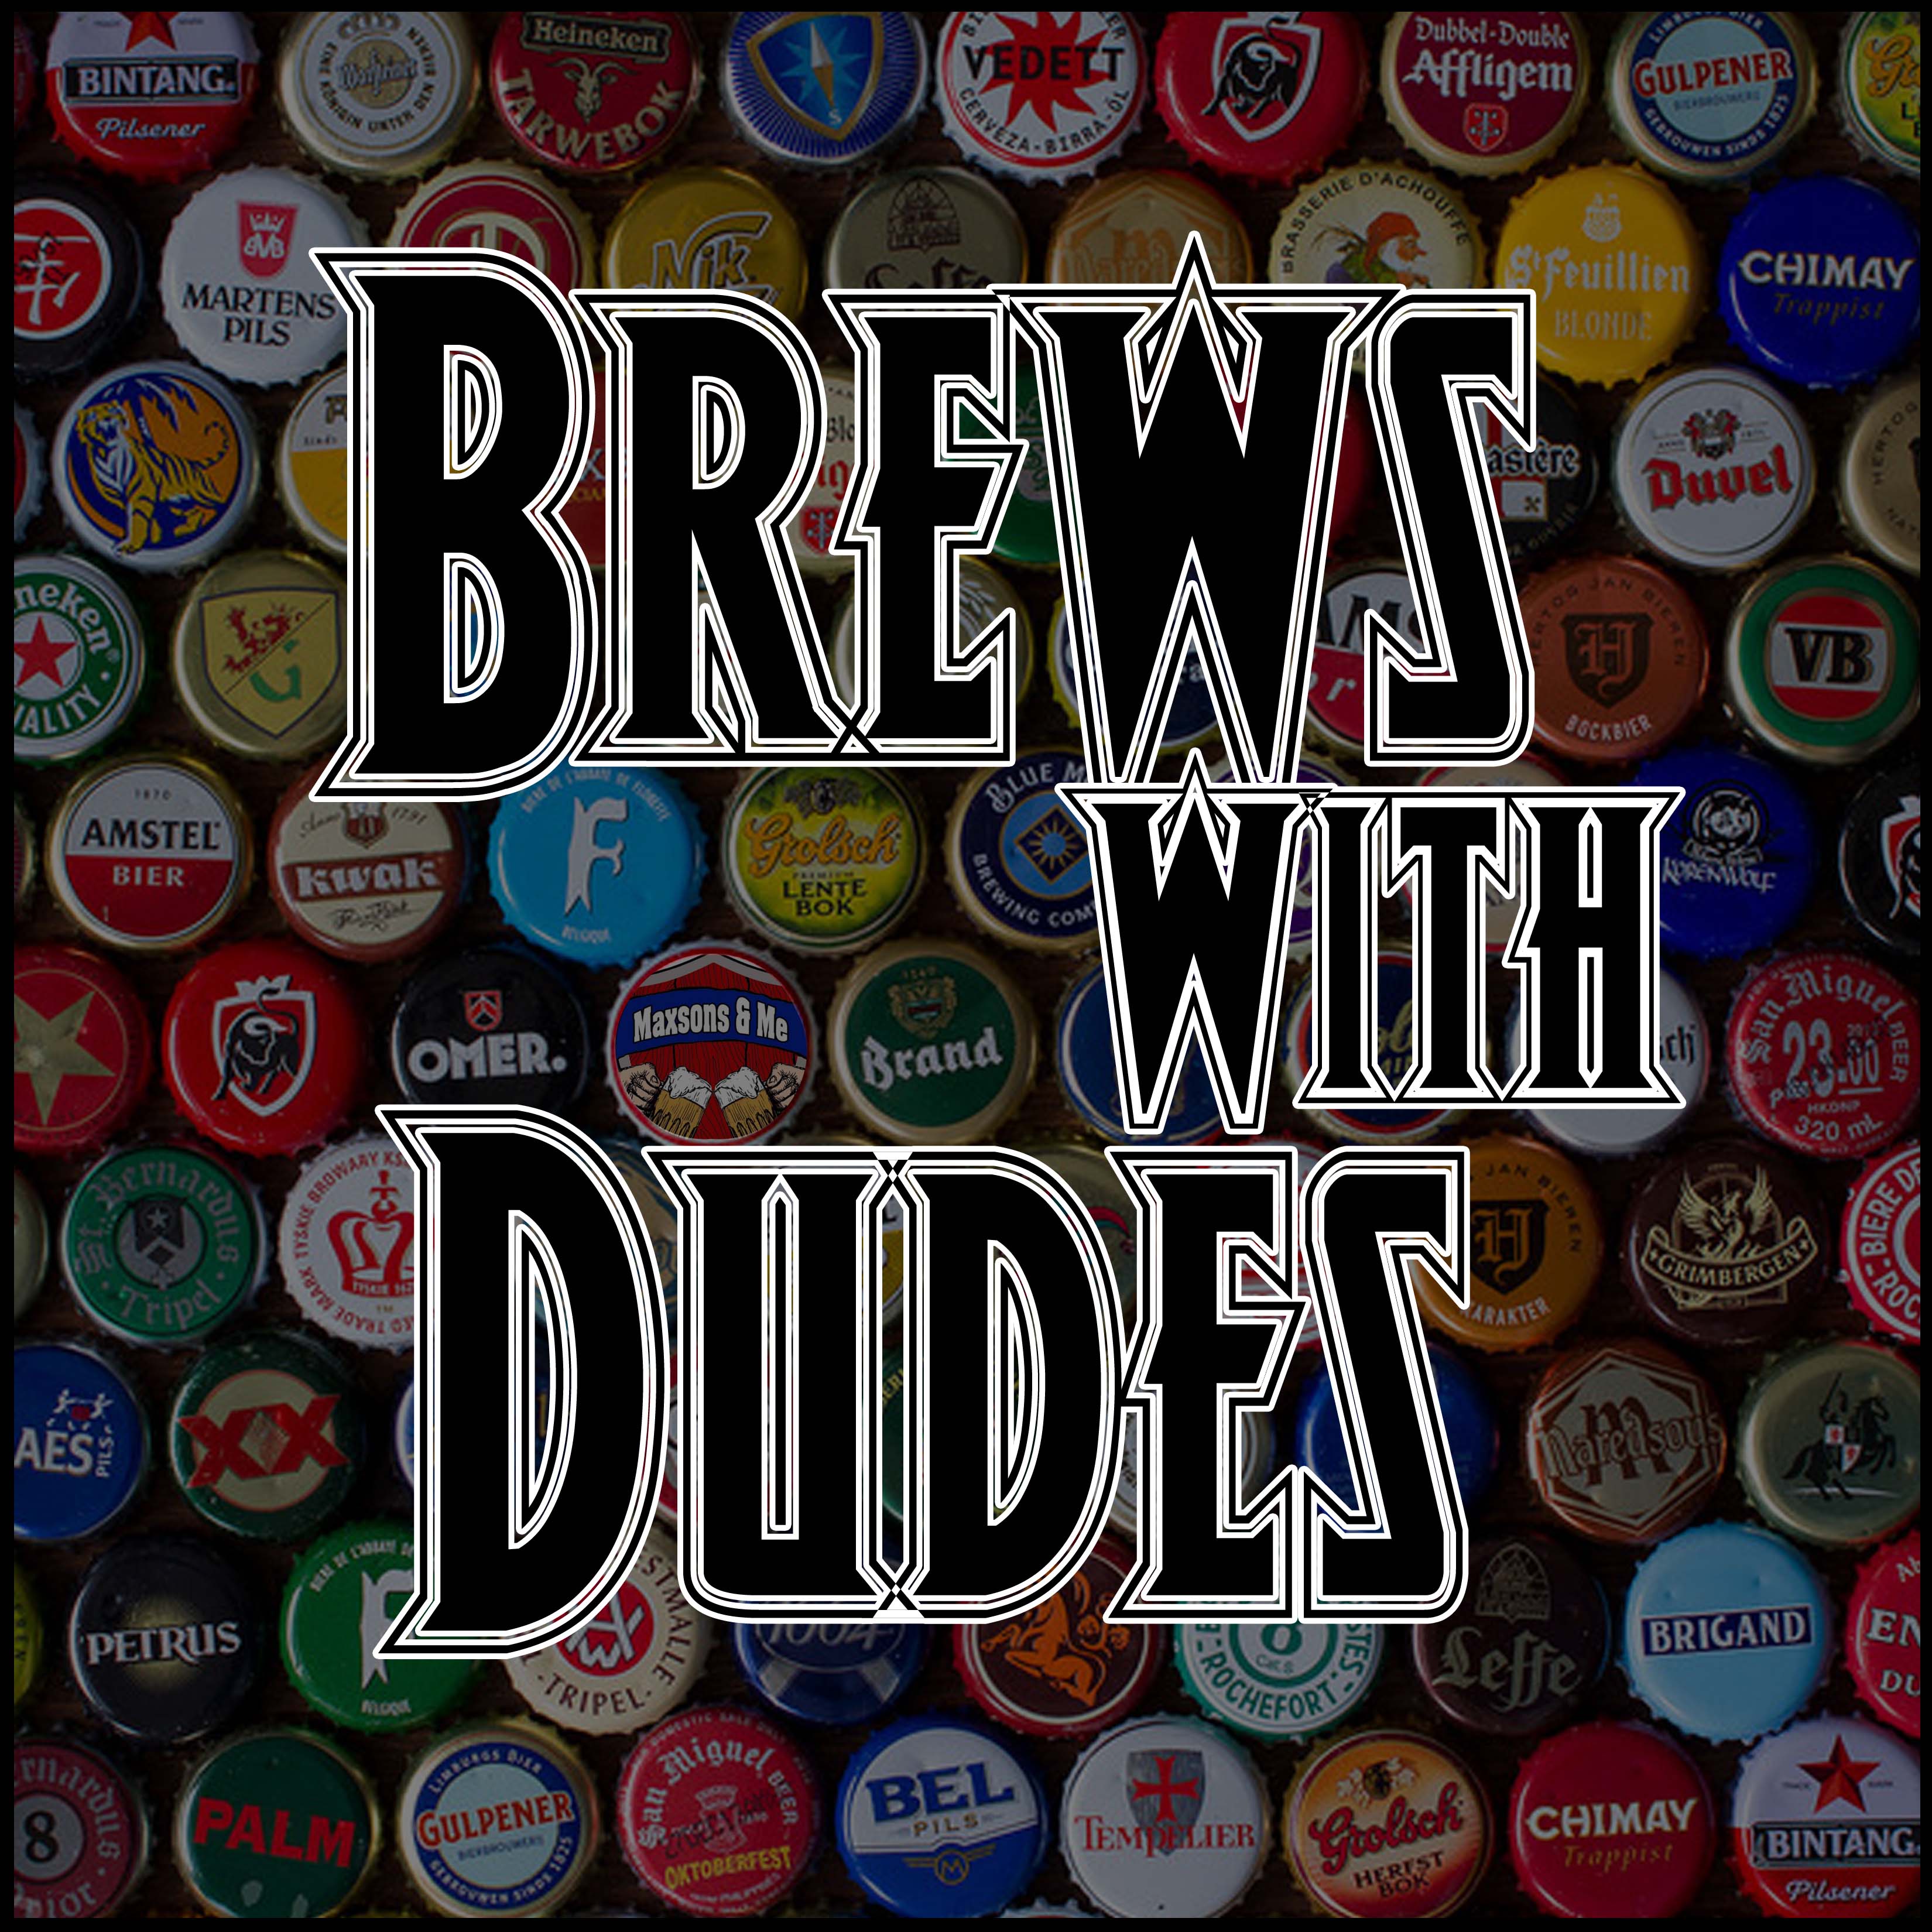 Brews With Dudes 016 - A Look at the Doom Room's Spring Calendar